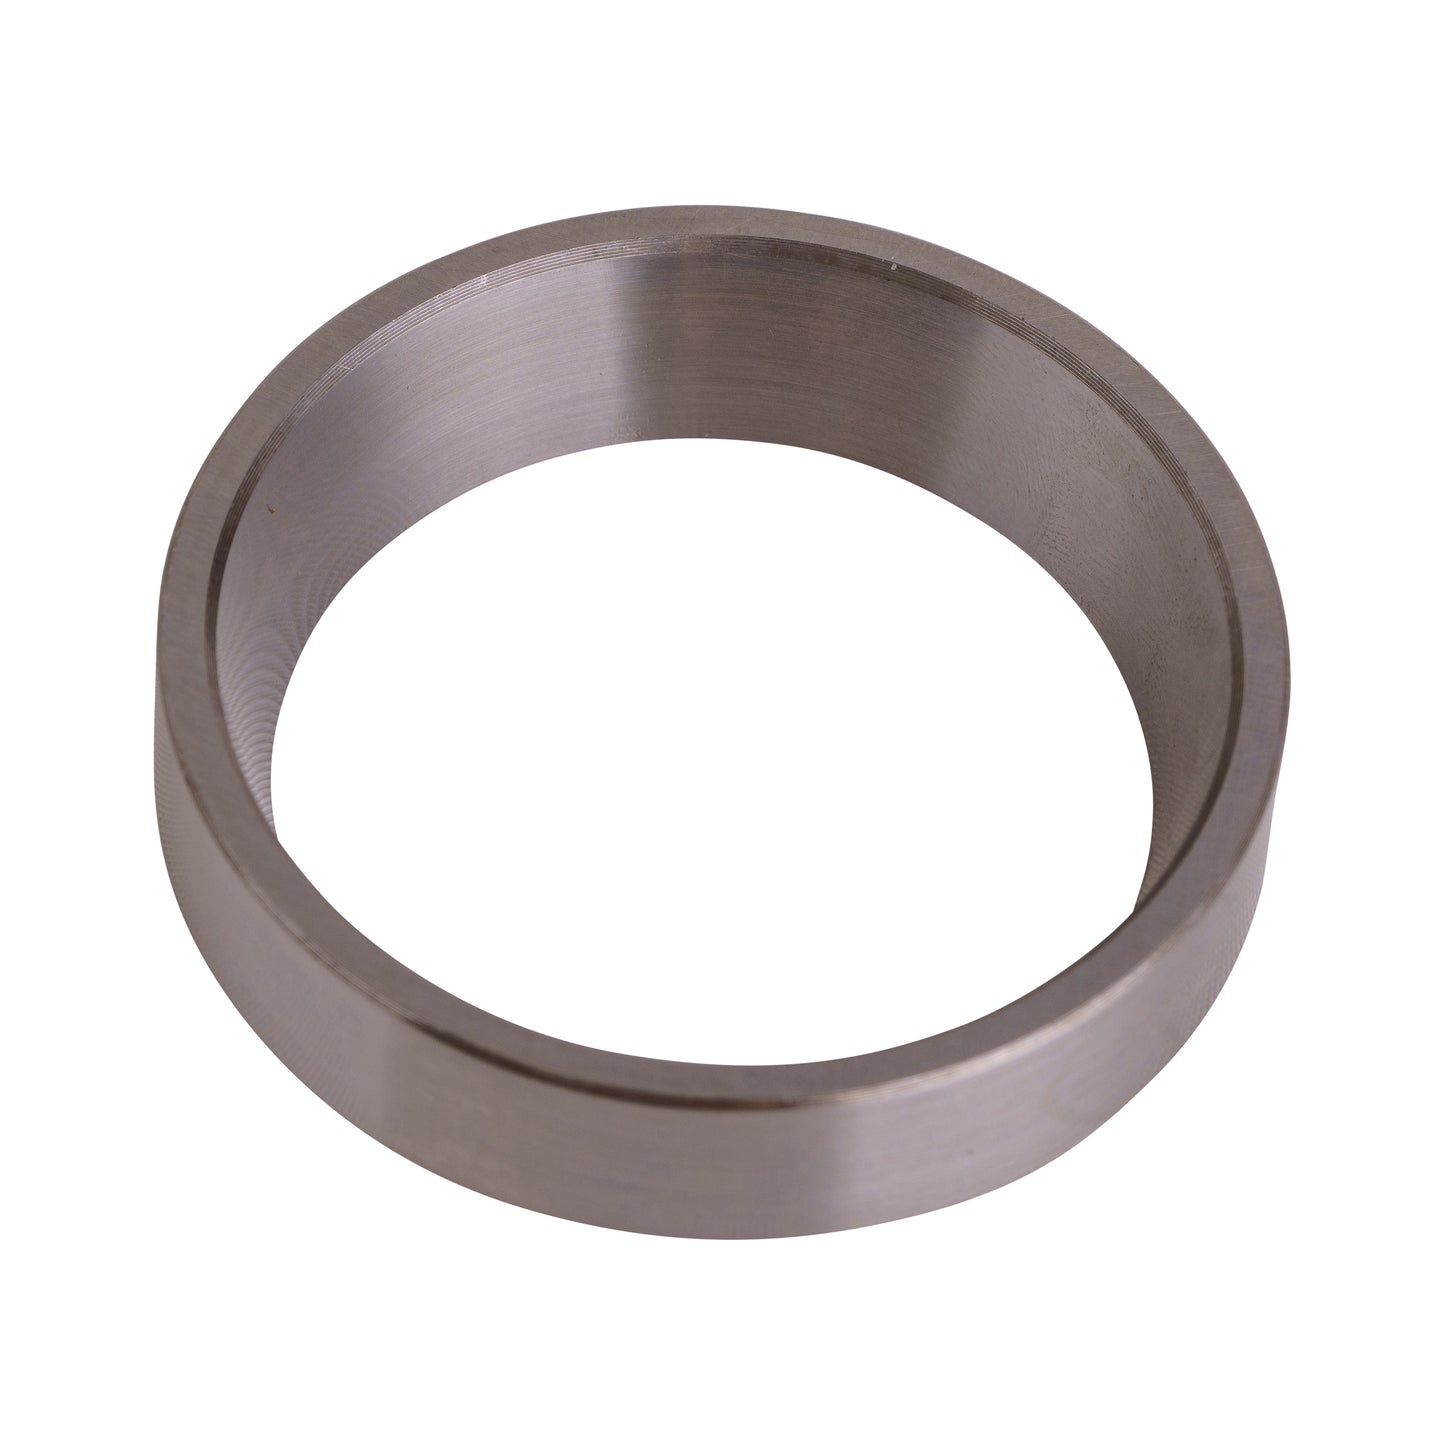 Replacement Trailer Bearing Race 14276 fits Bearing 14125A